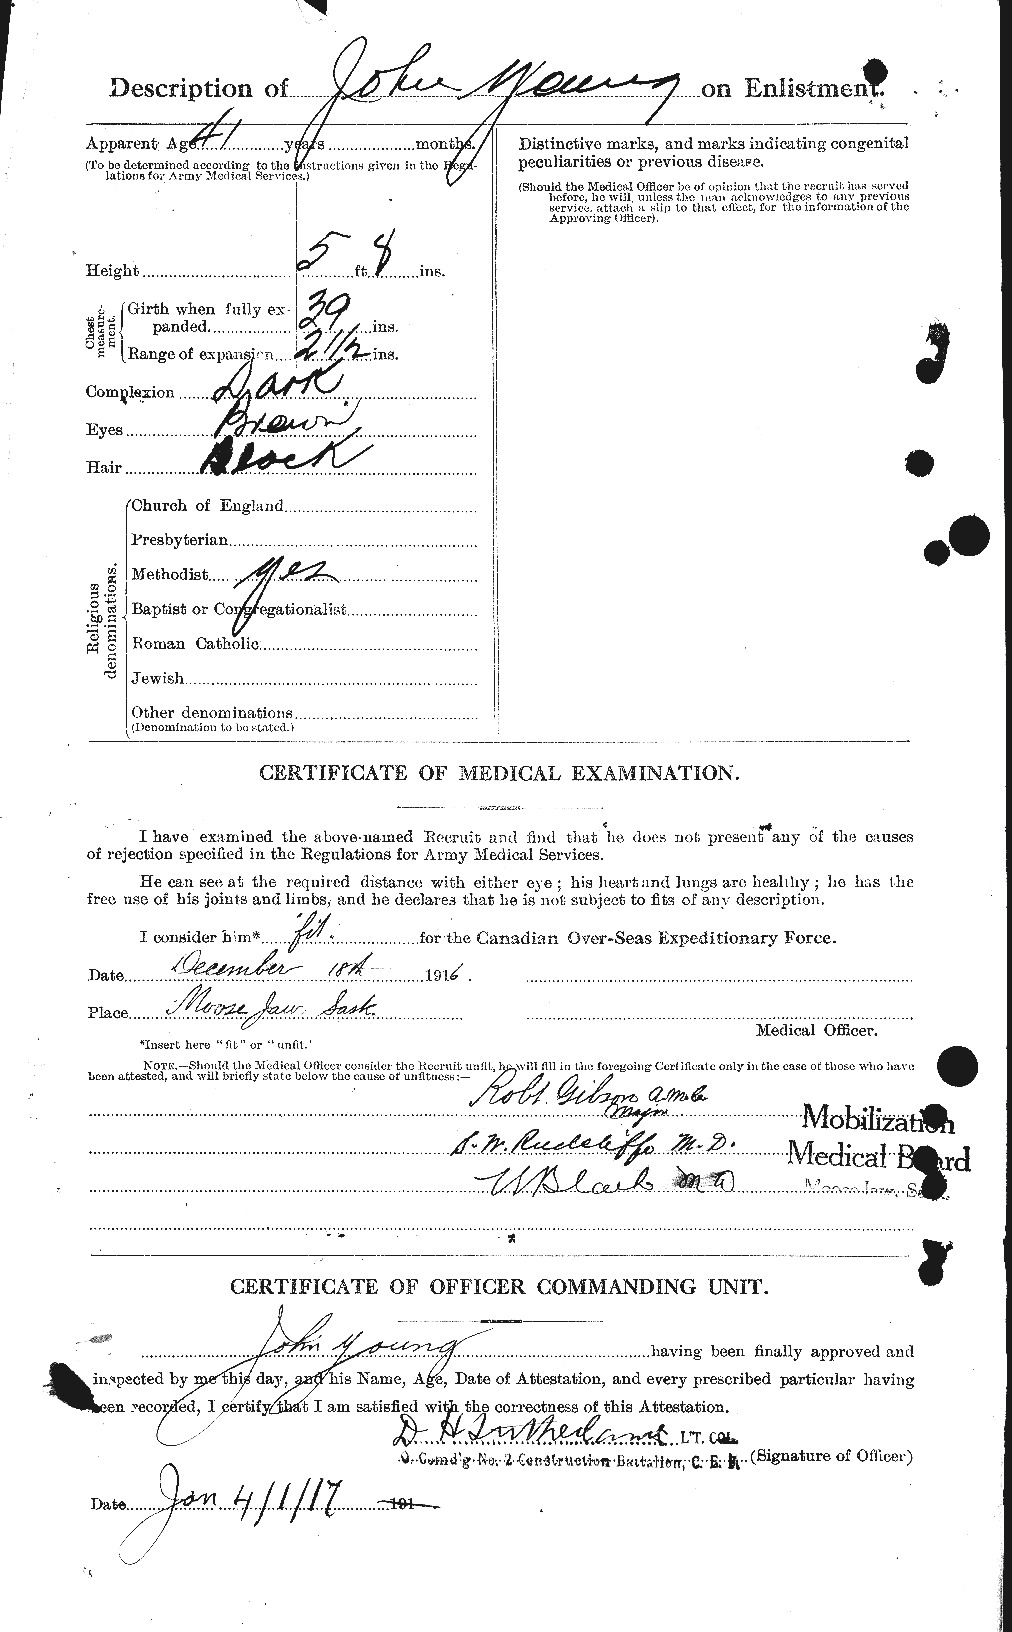 Personnel Records of the First World War - CEF 690721b